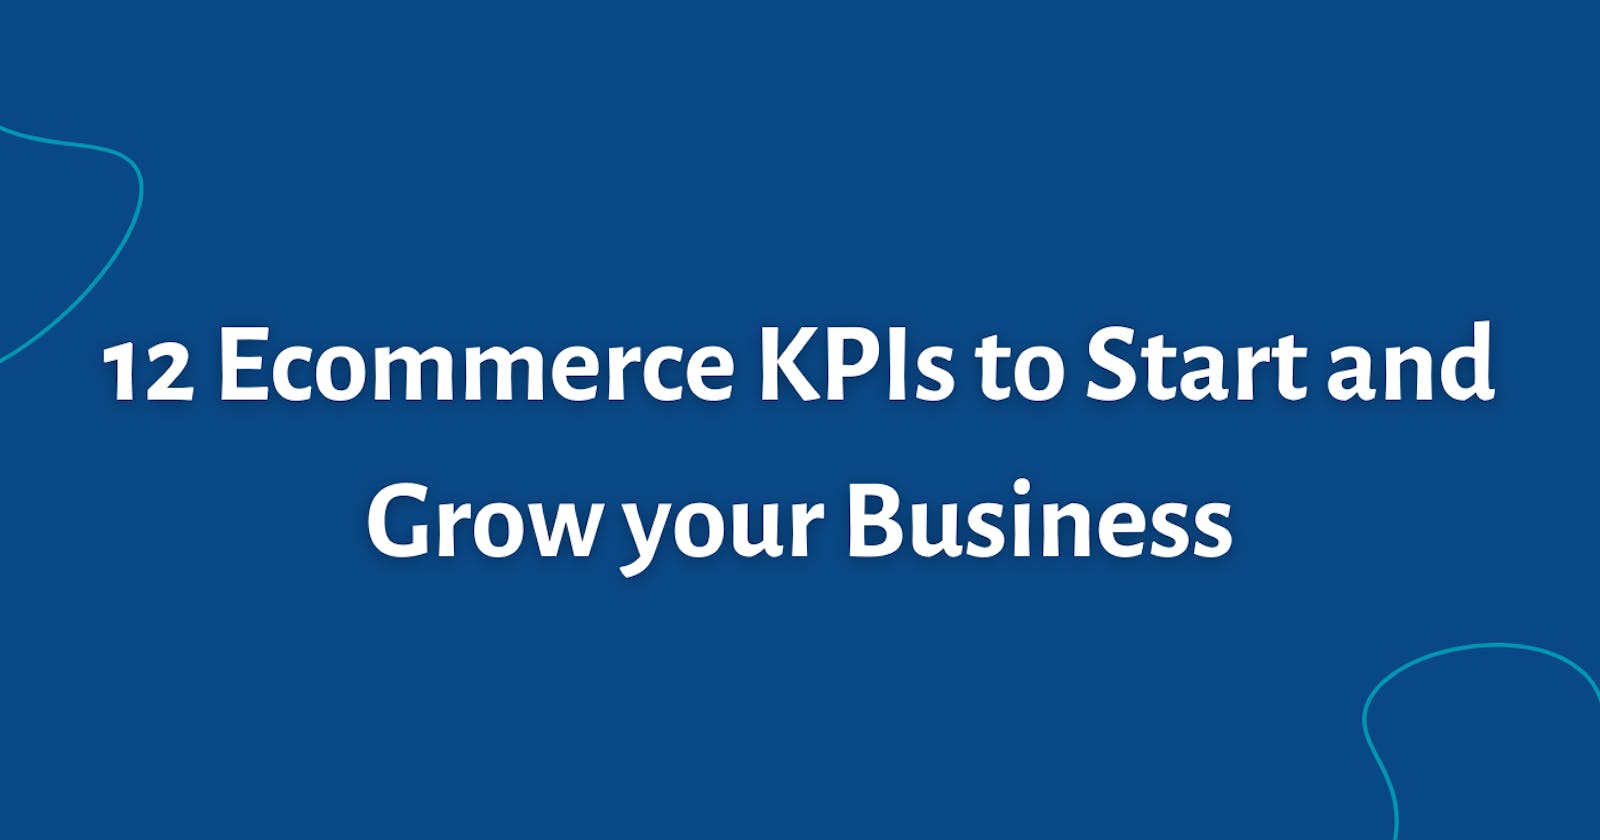 12 Ecommerce KPIs to Start and Grow your Business